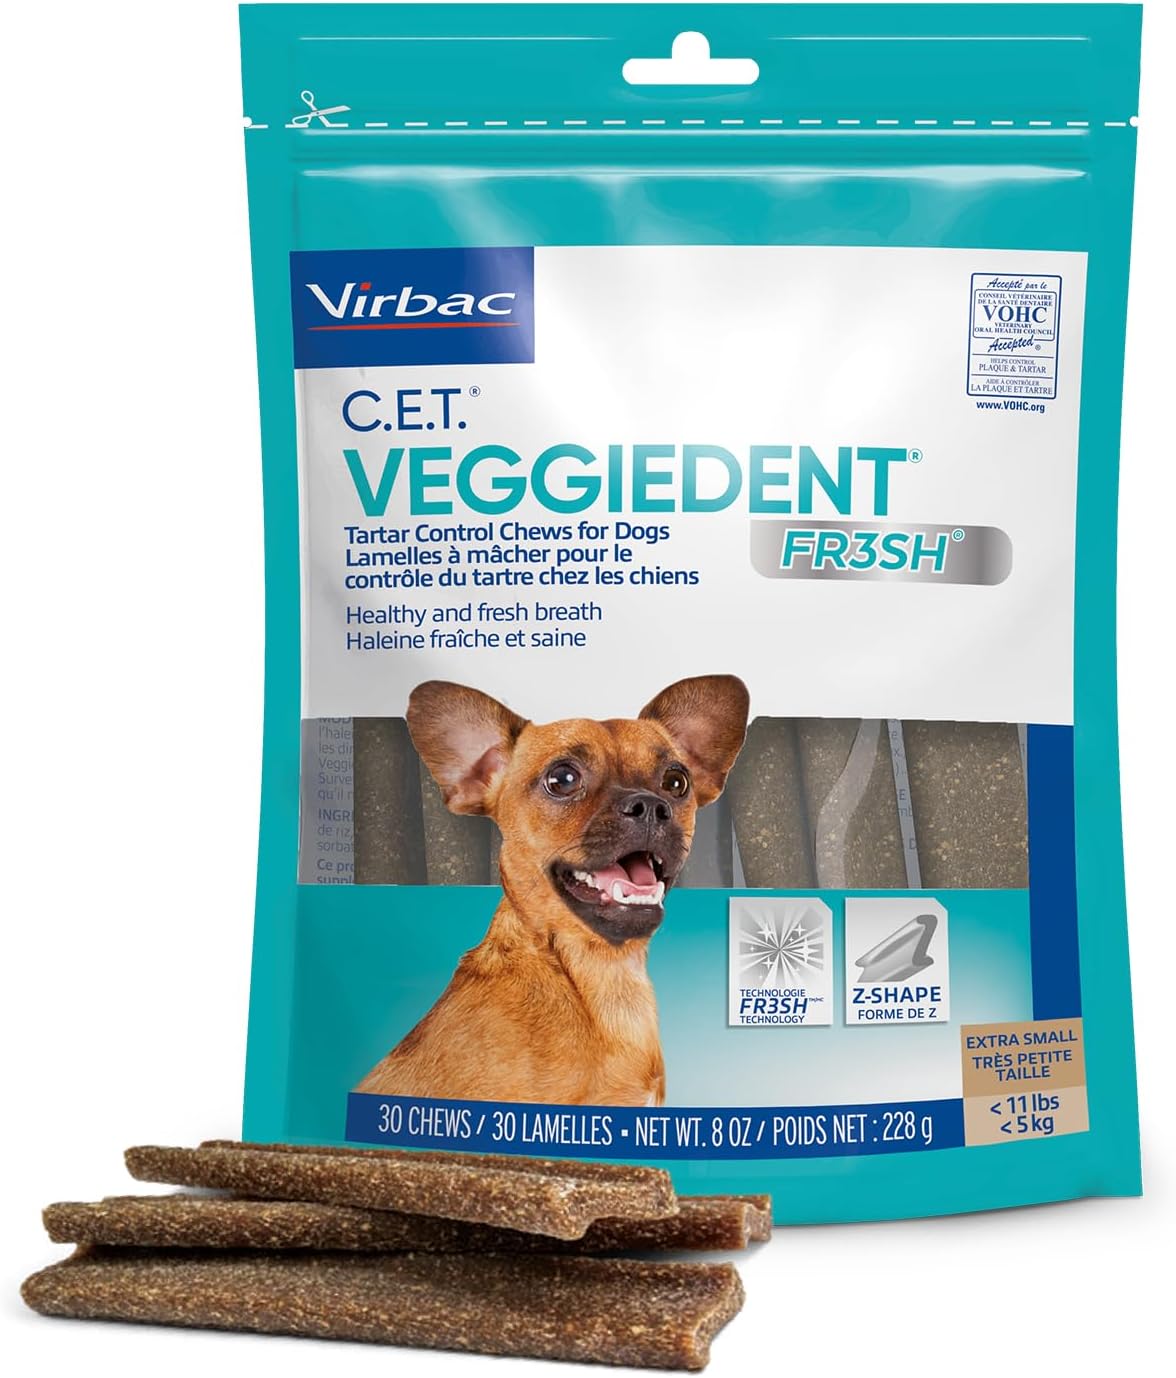 Virbac C.E.T. VEGGIEDENT FR3SH Tartar Control Chews for Dogs, Extra Small, 8 oz (Pack of 1)